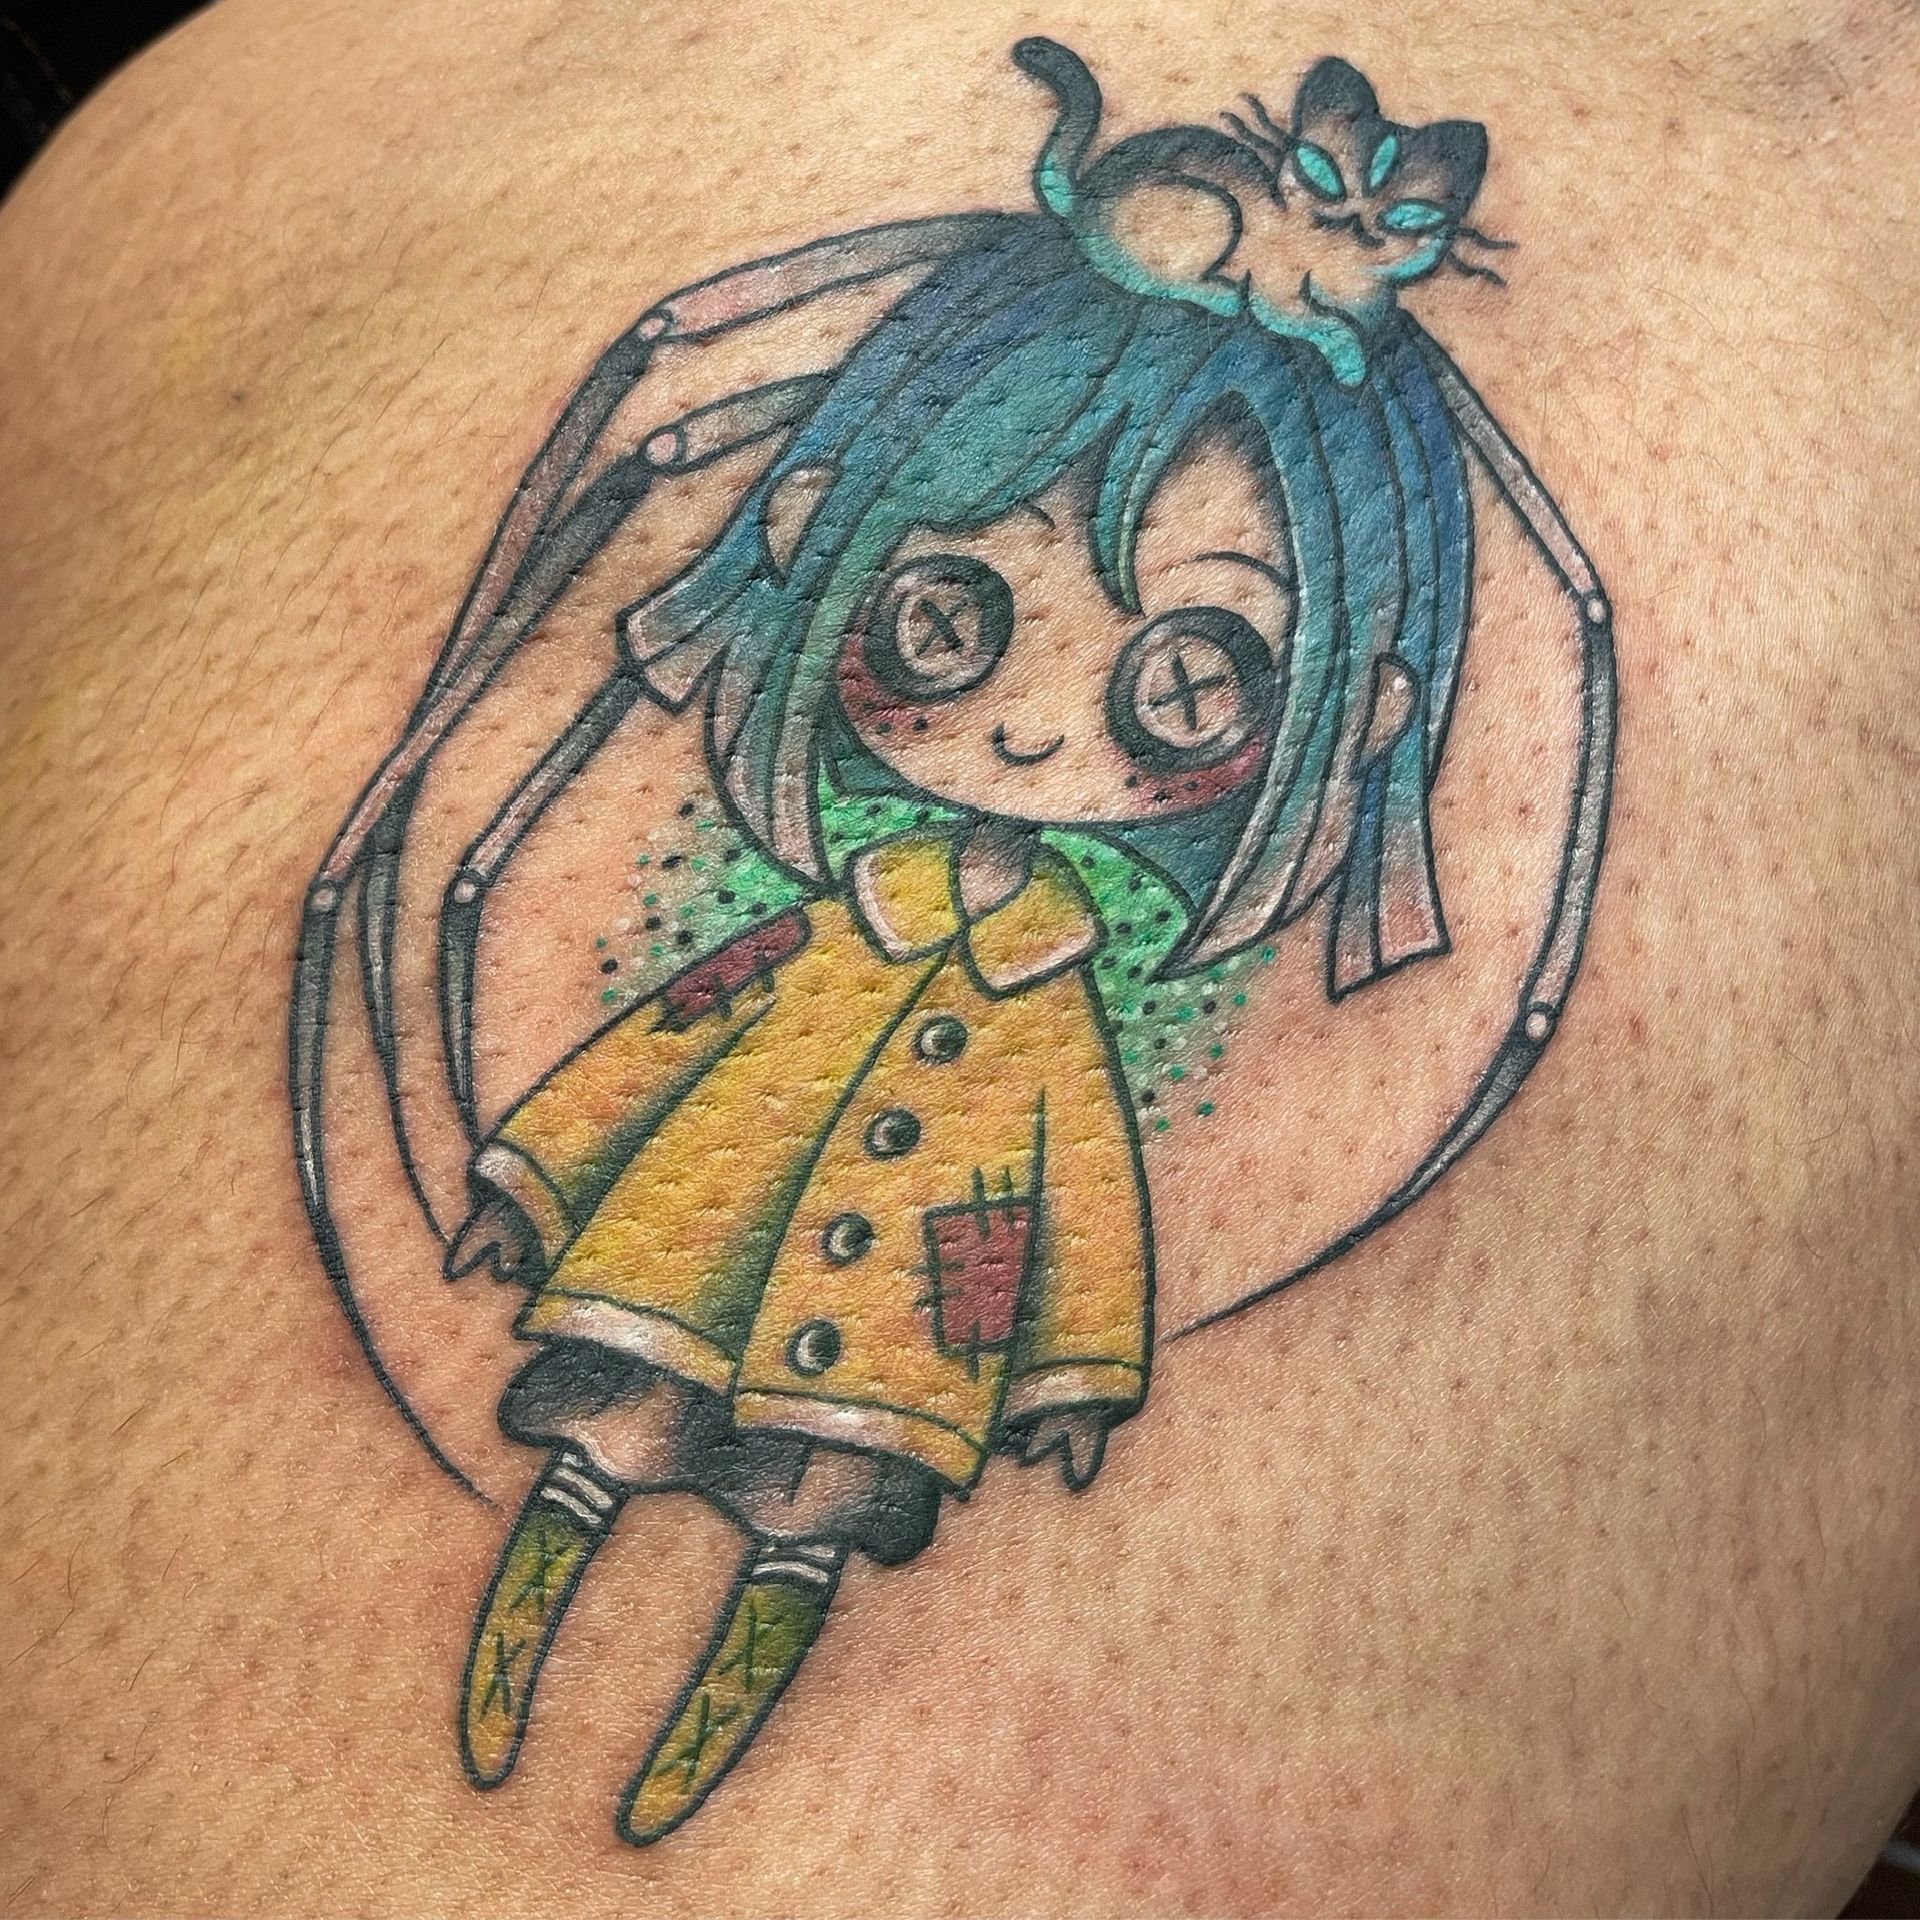 Finding Things  Coraline Tattoo Idea by fablehill on DeviantArt